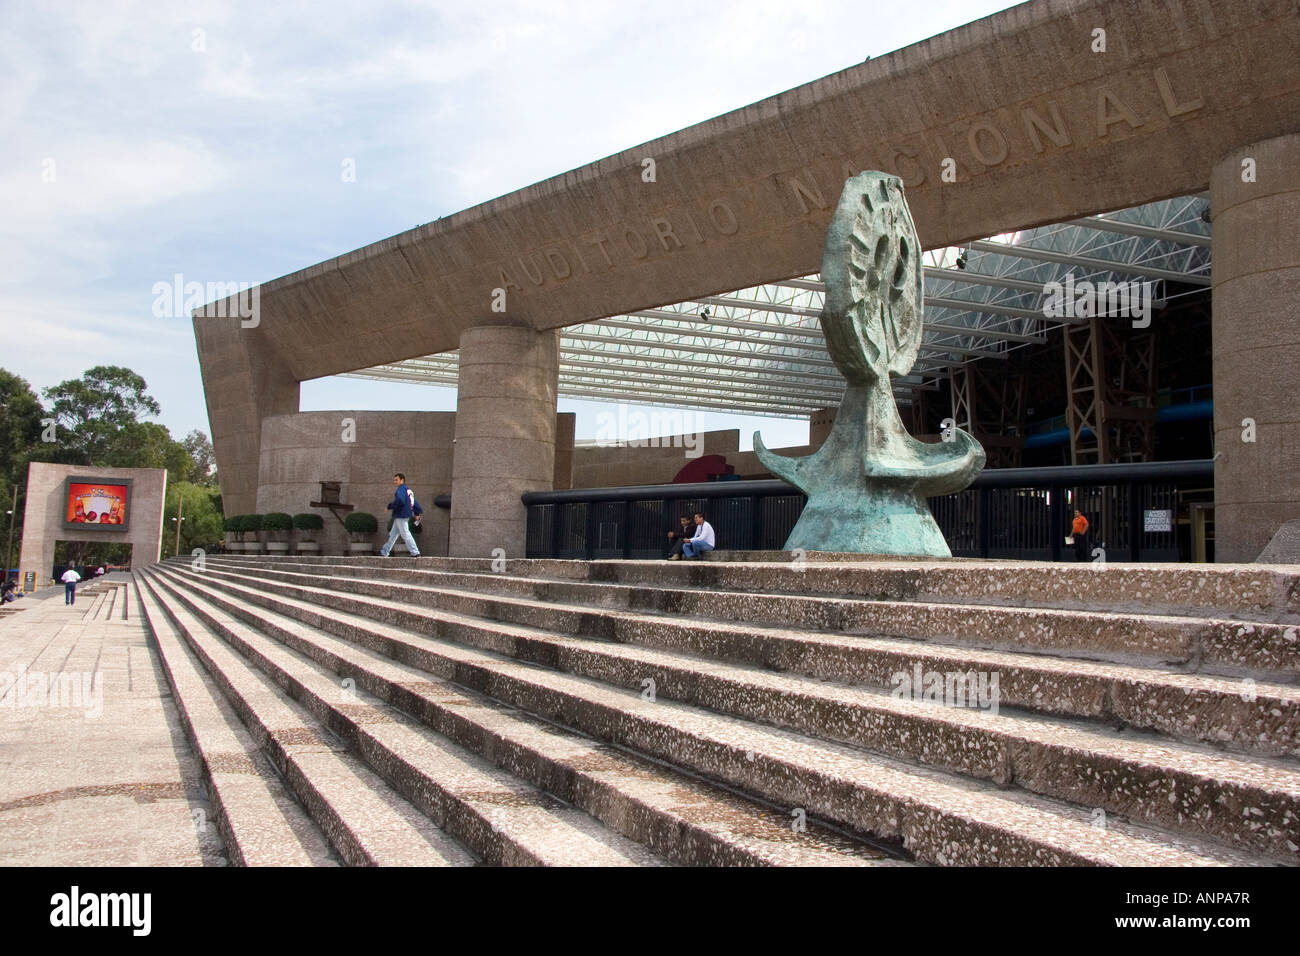 The National Auditorium in Mexico City Mexico Stock Photo